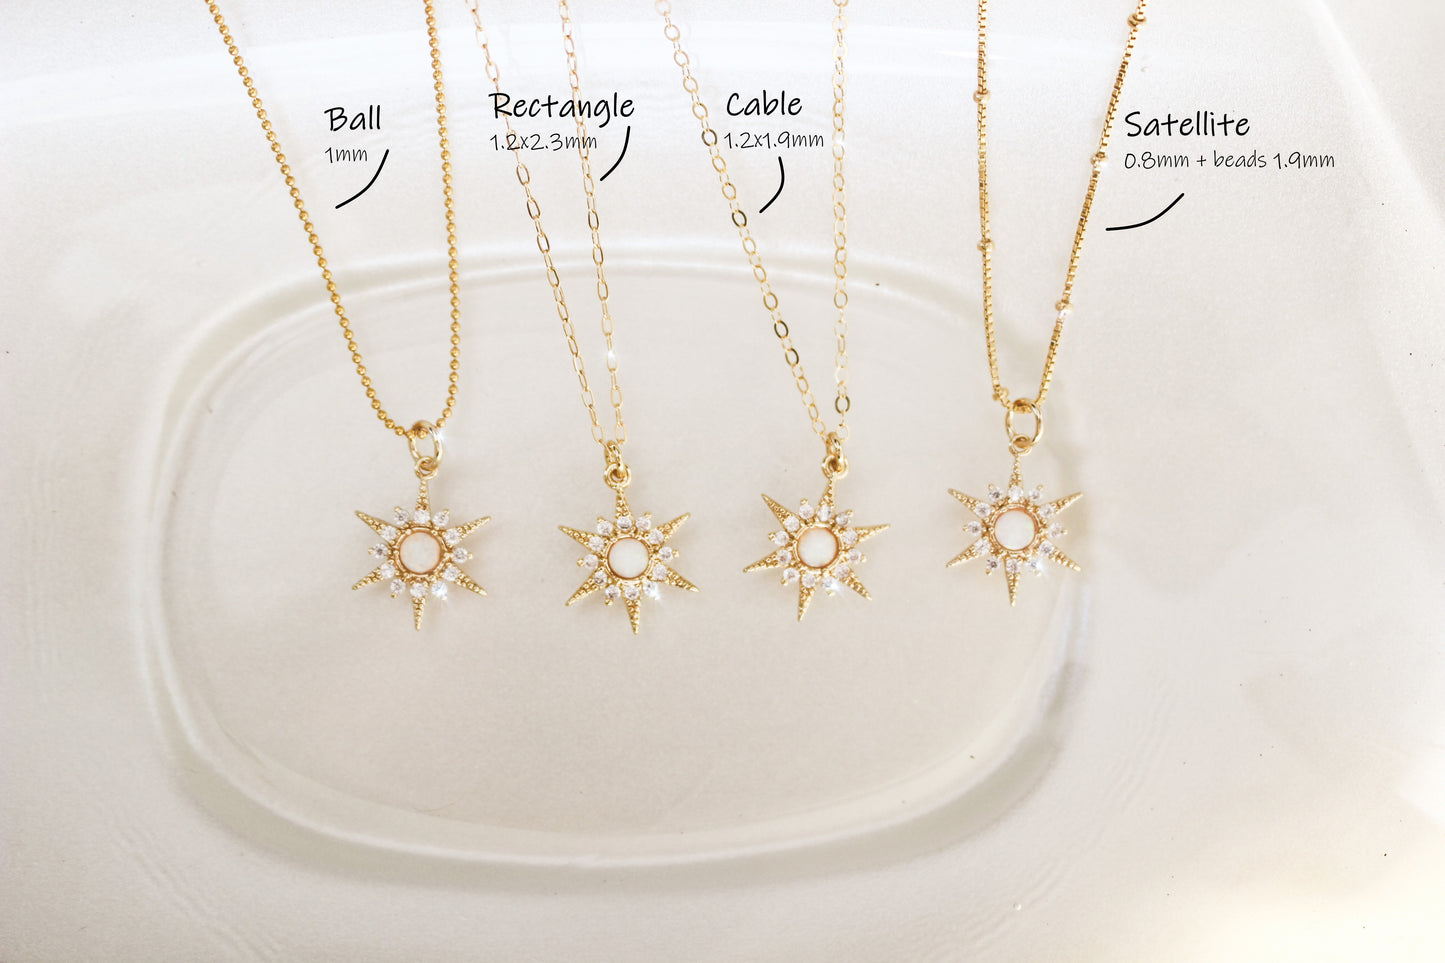 Celestial opal necklace - Gold Filled Micro Pave Opal Star Necklace